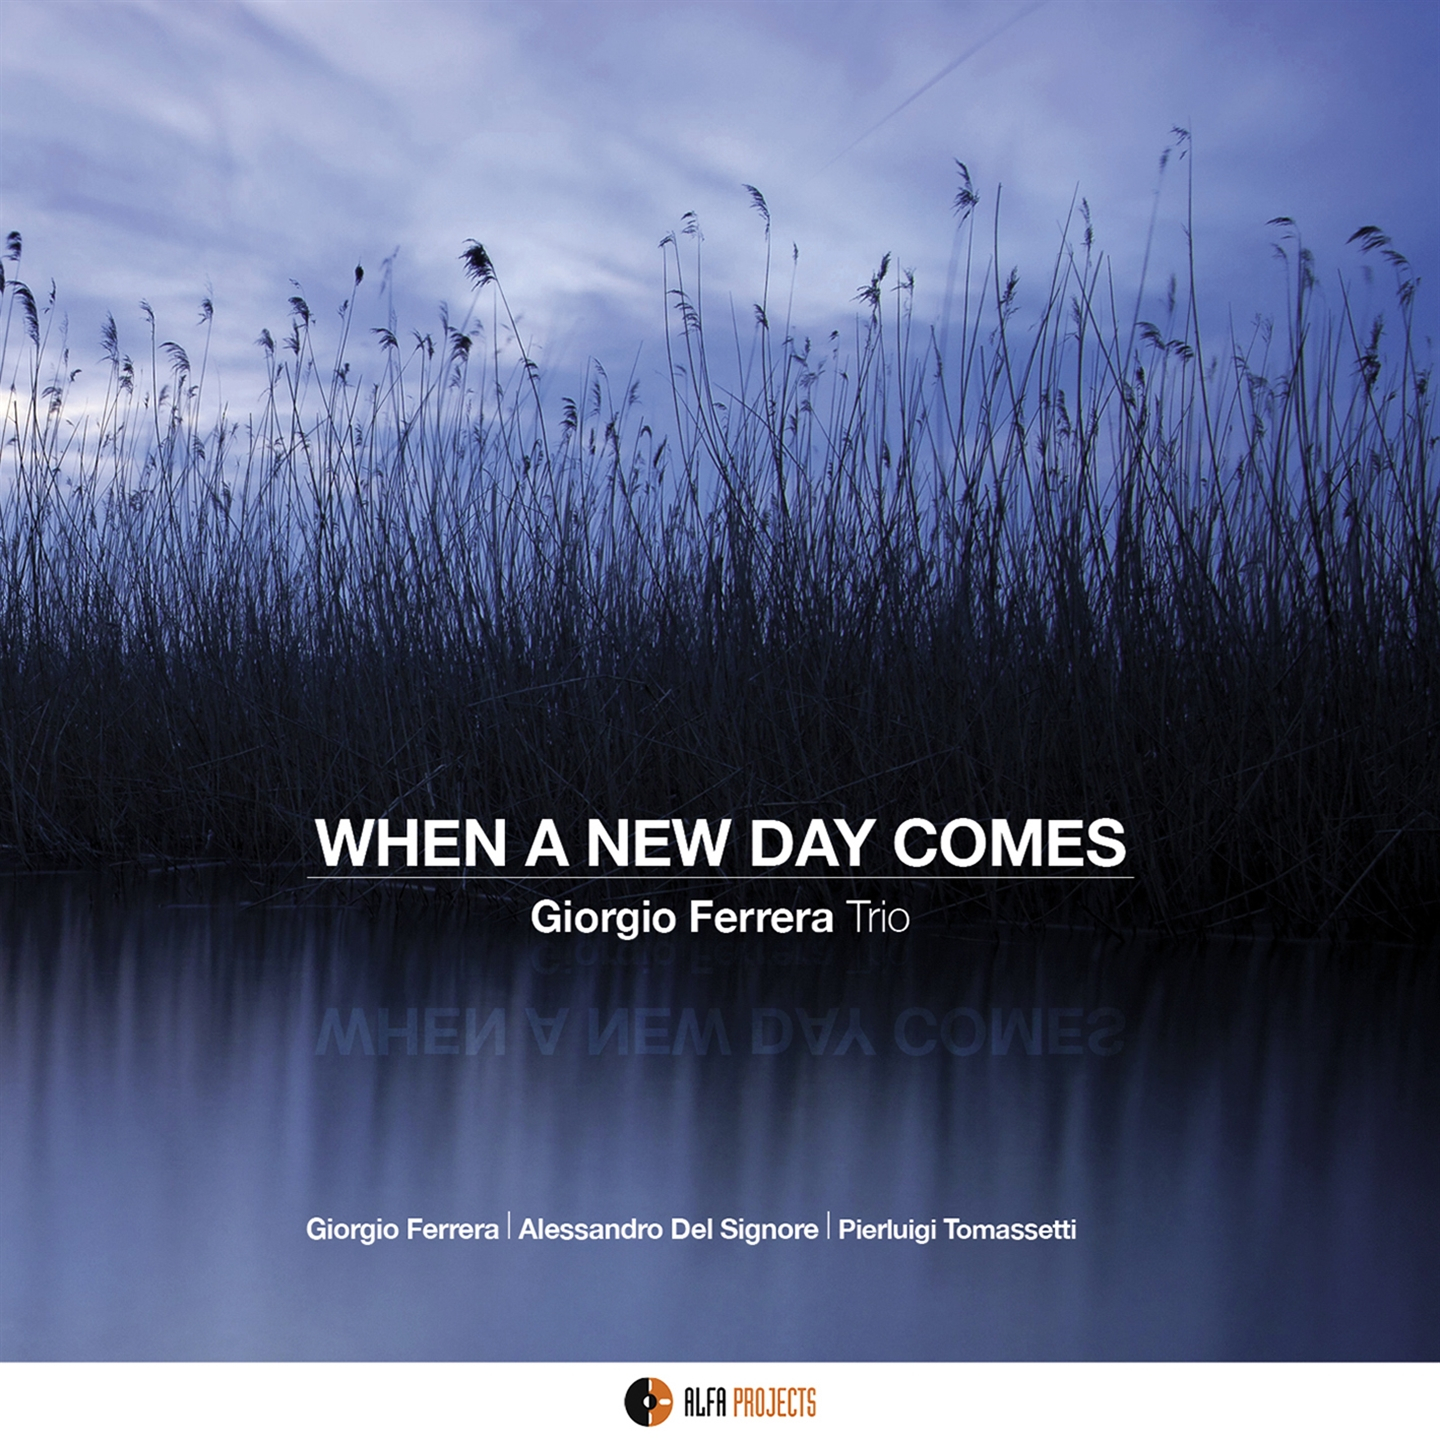 WHEN A NEW DAY COMES